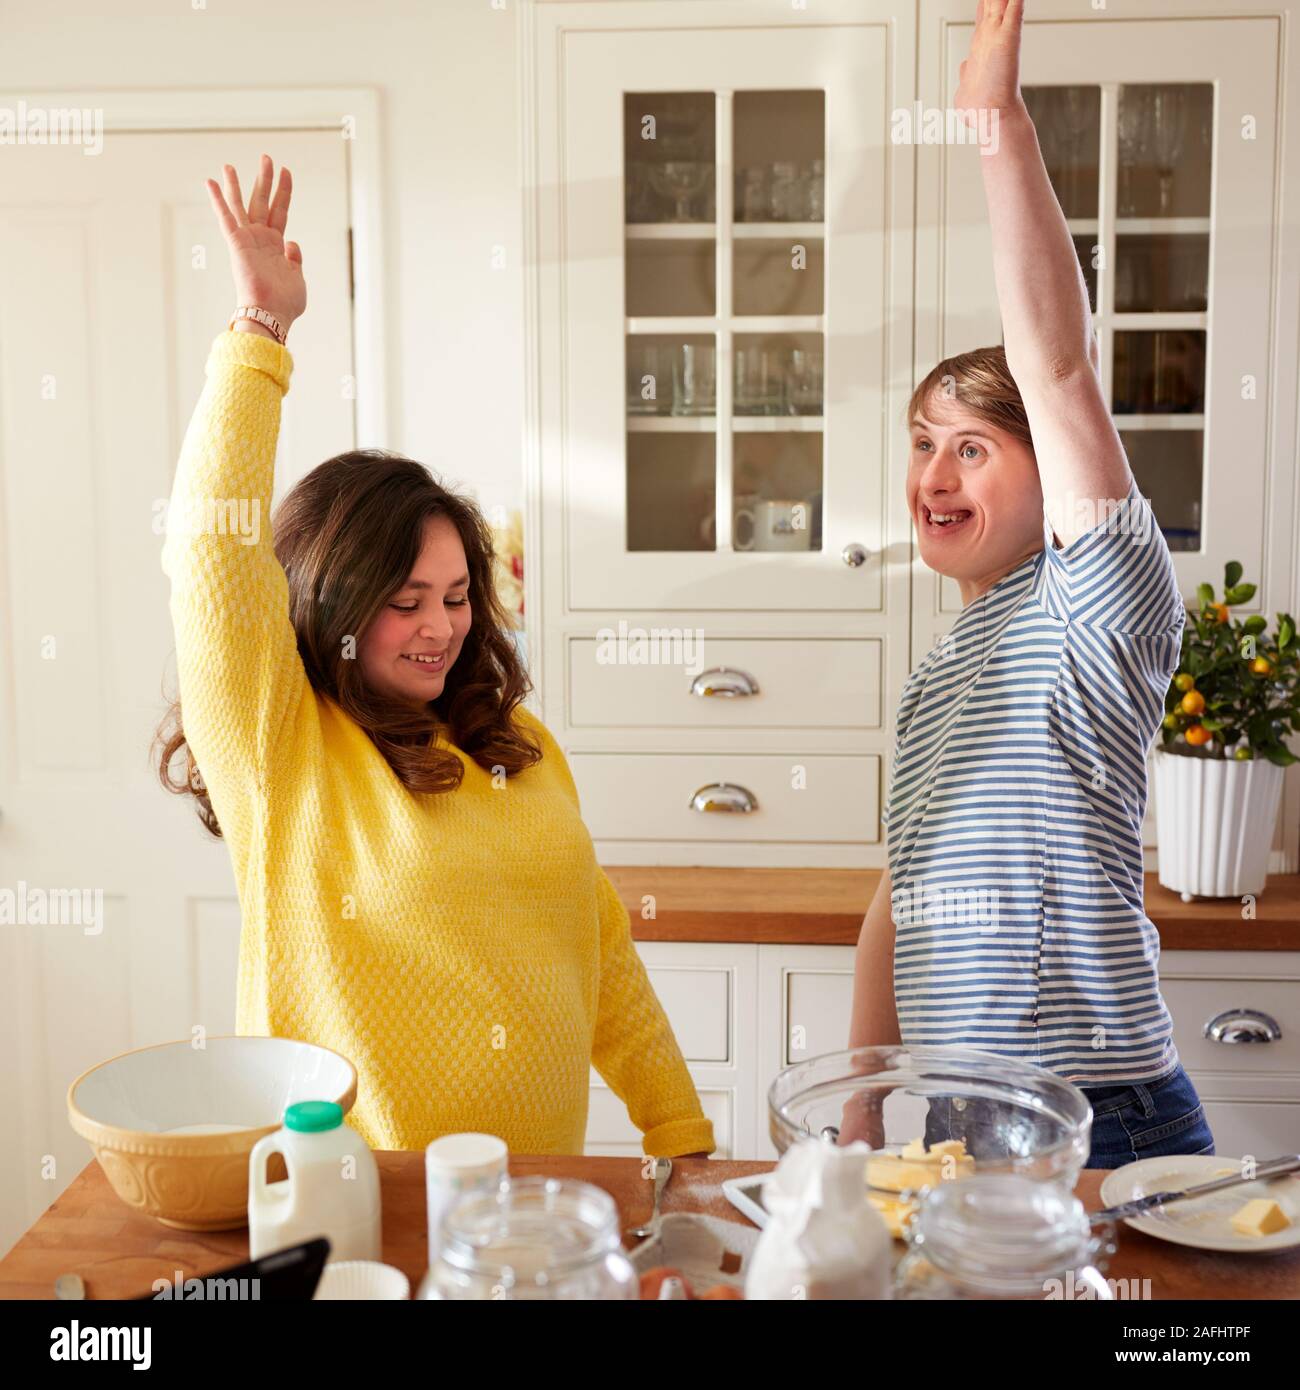 Young Downs Syndrome Couple Having Fun Baking In Kitchen At Home Stock Photo